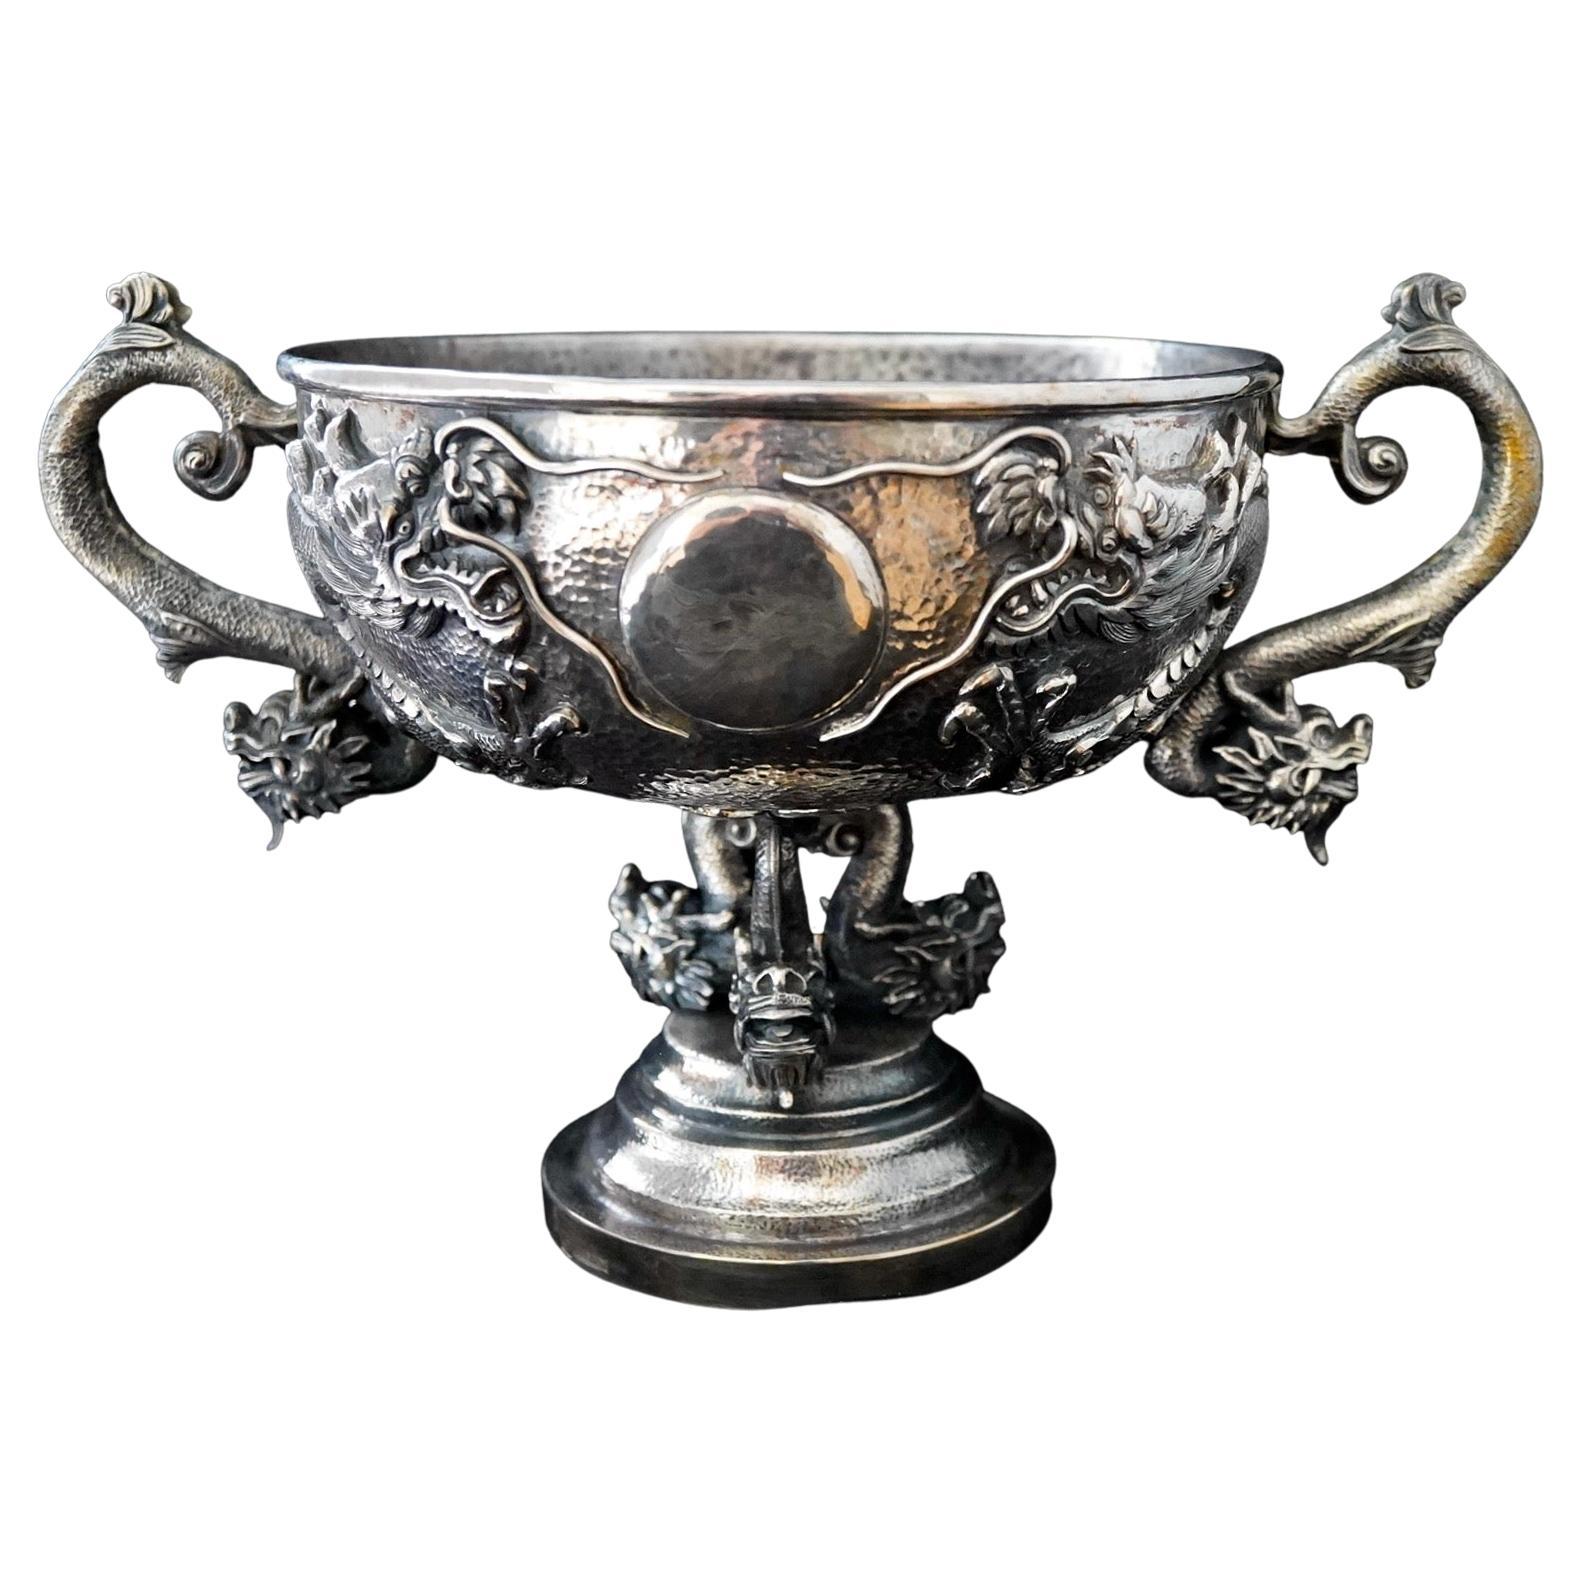 Chinese Export Silver Dragon Repousse Centerpiece For Sale